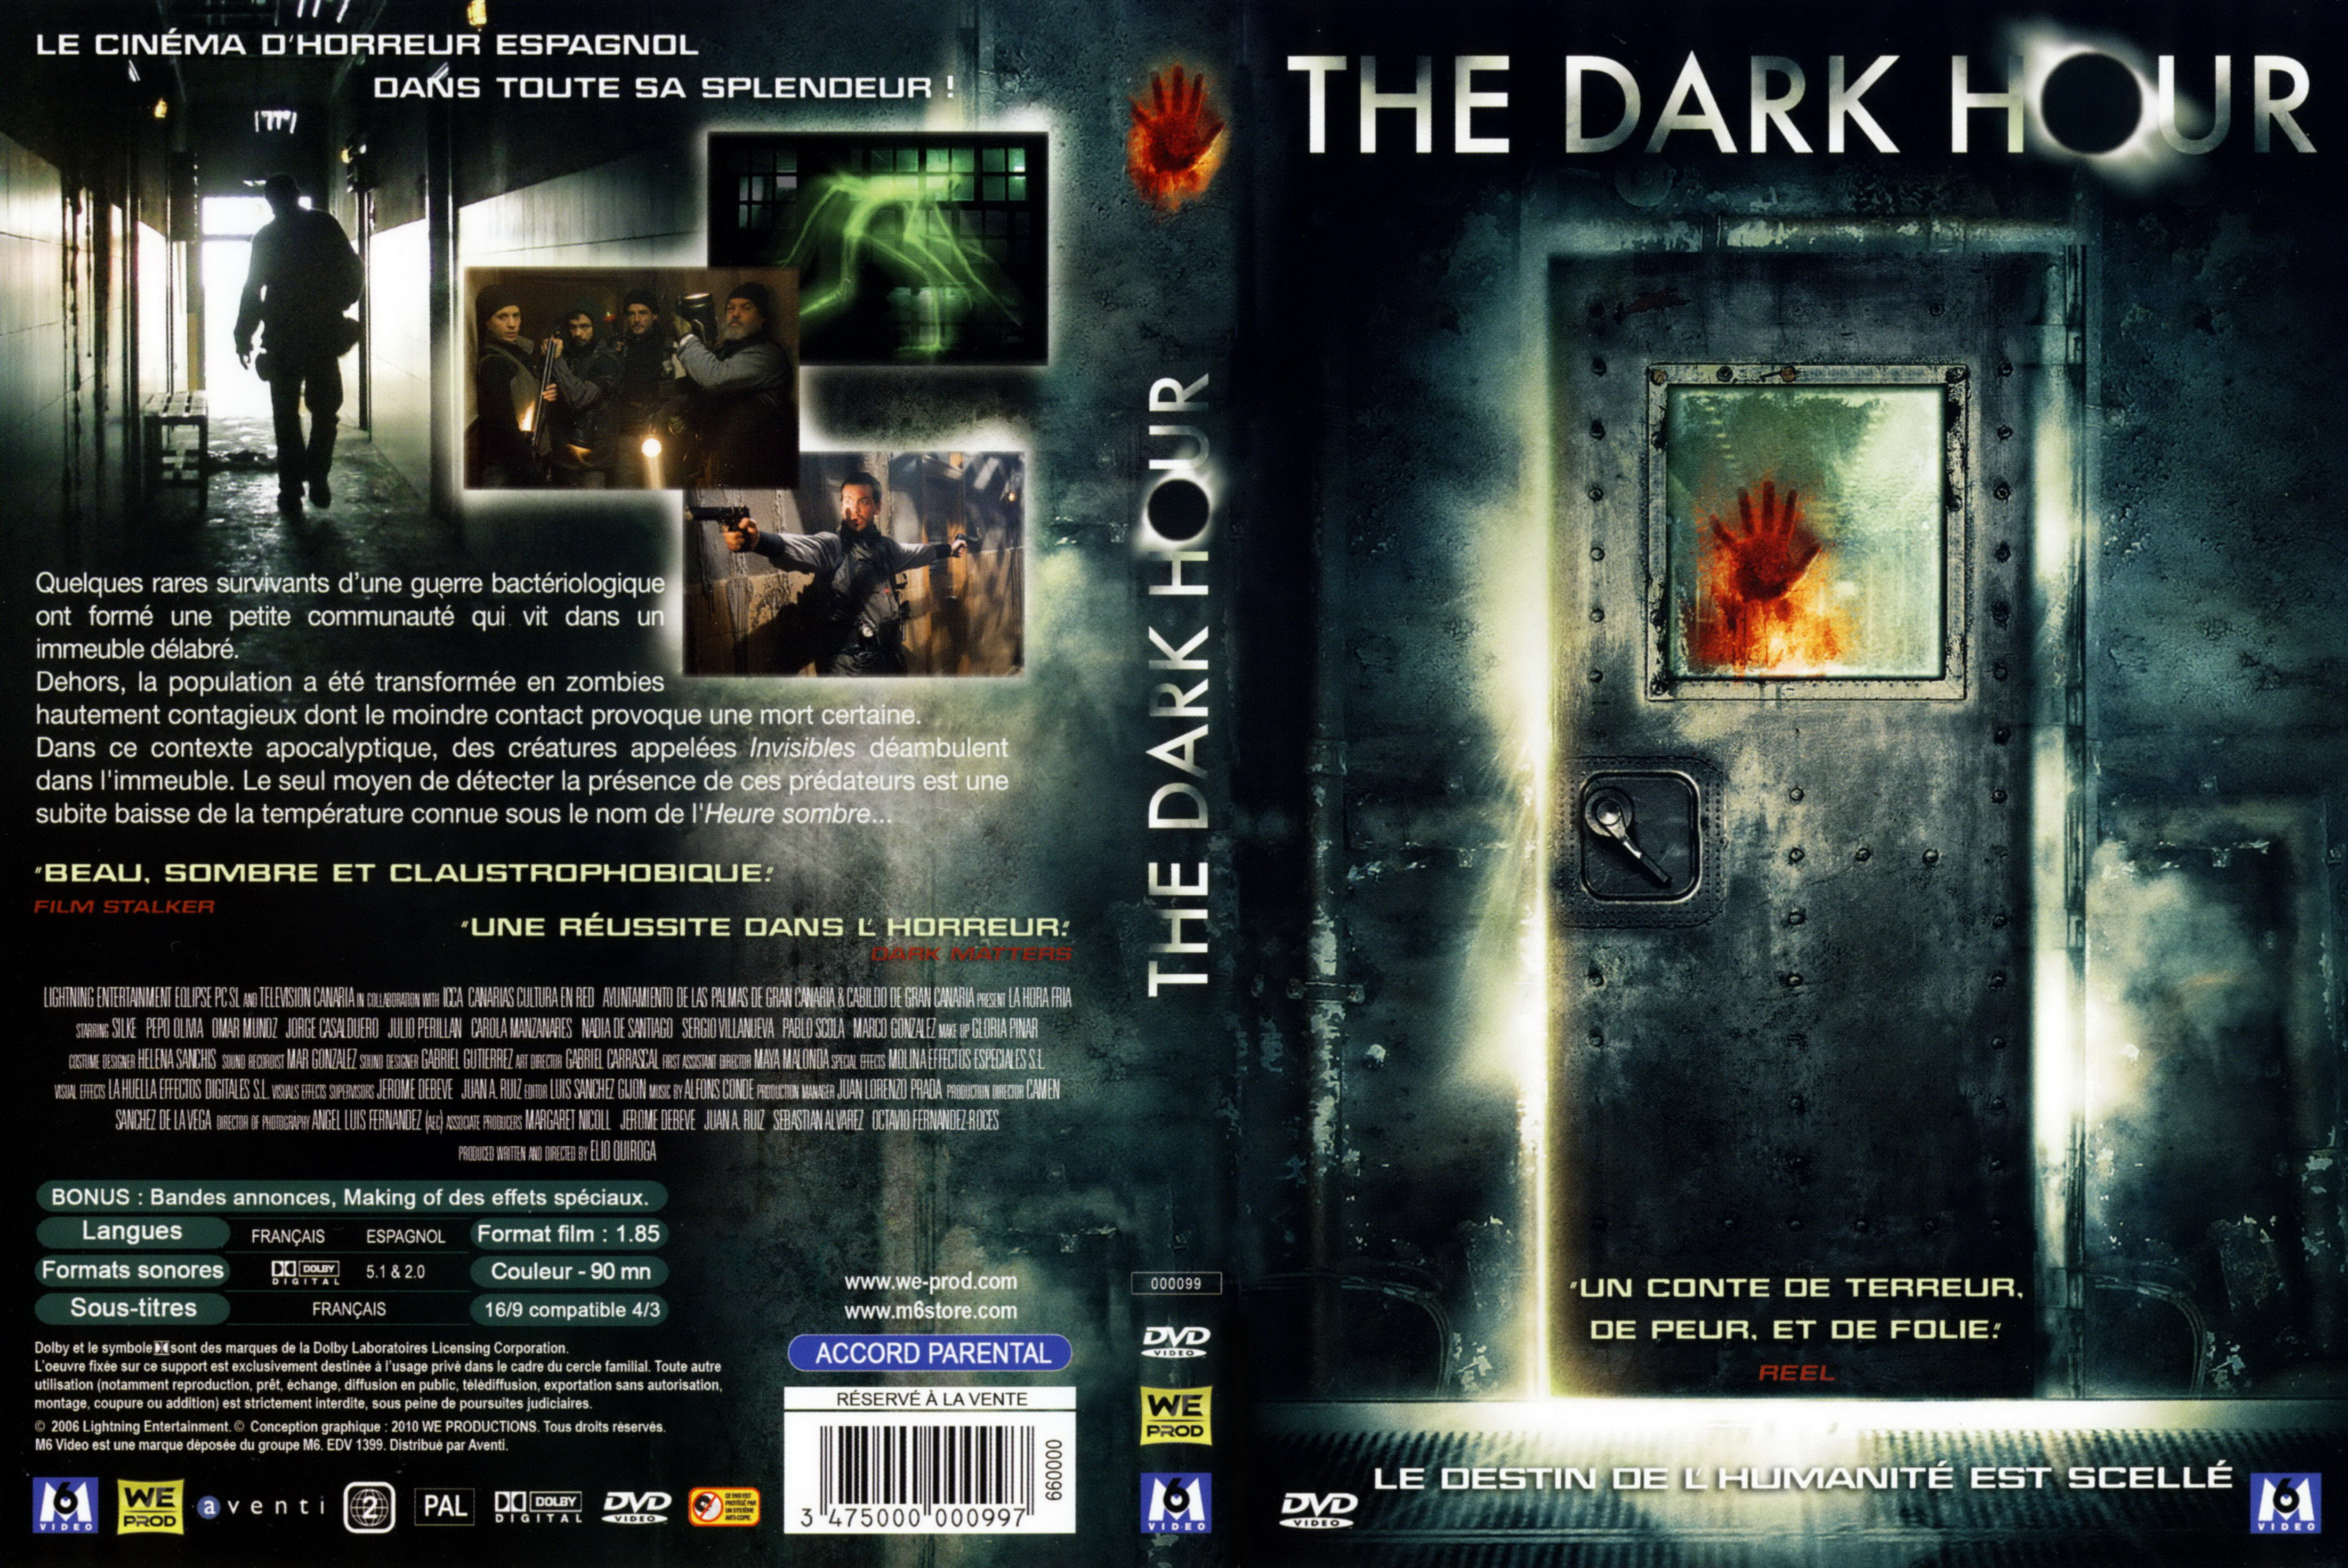 Jaquette DVD The dark hour